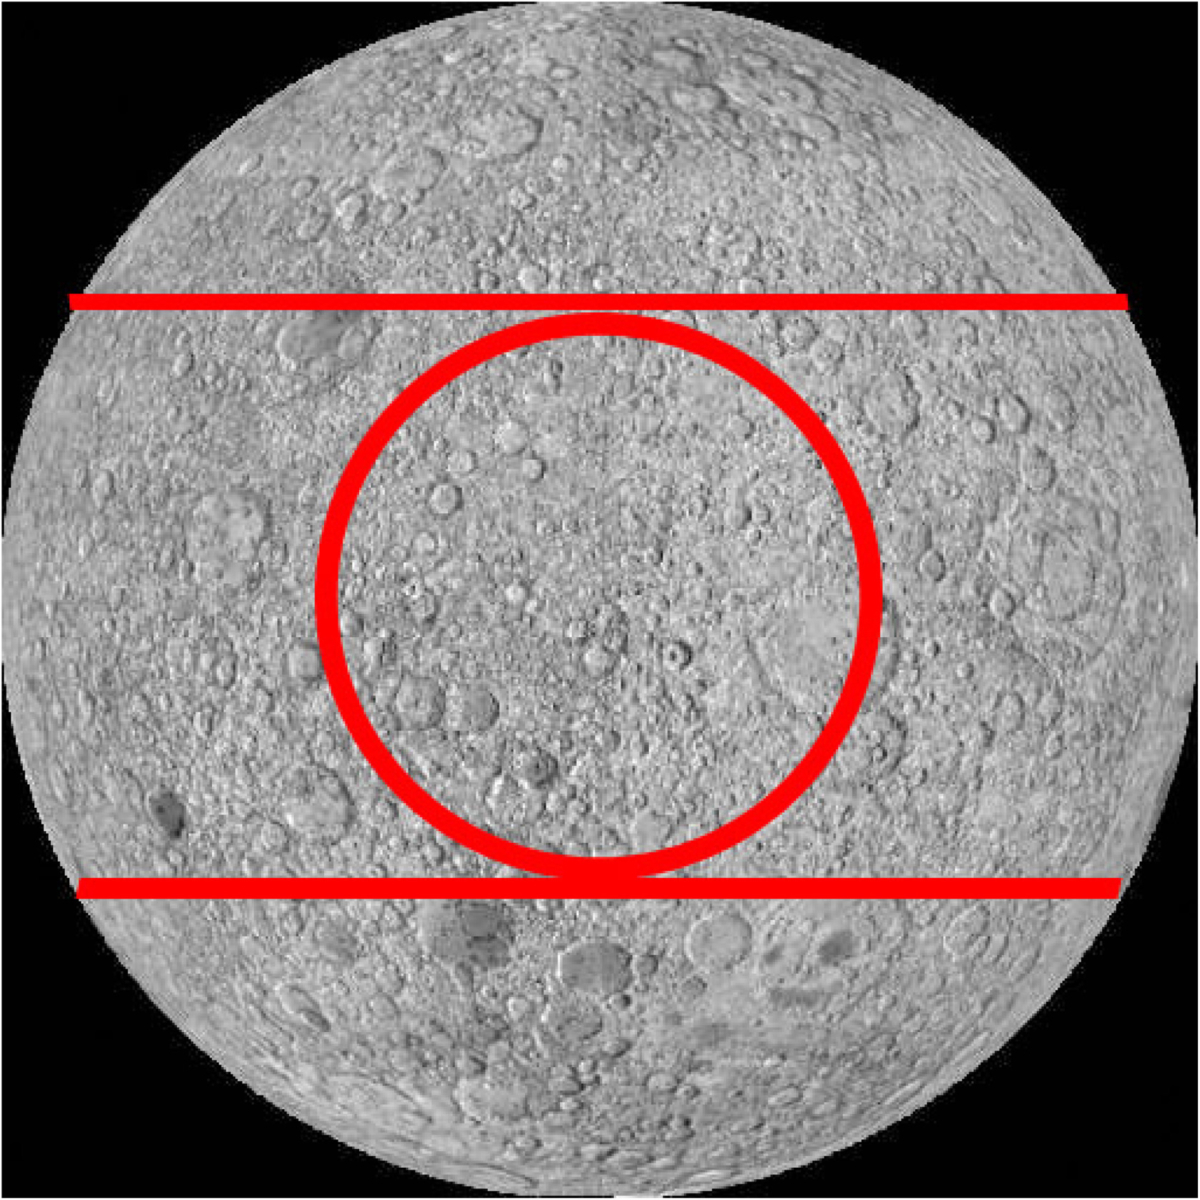 The Protected Antipode Circle, a circular fragment of the lunar landscape proposed for scientific purposes on the far side of the moon.